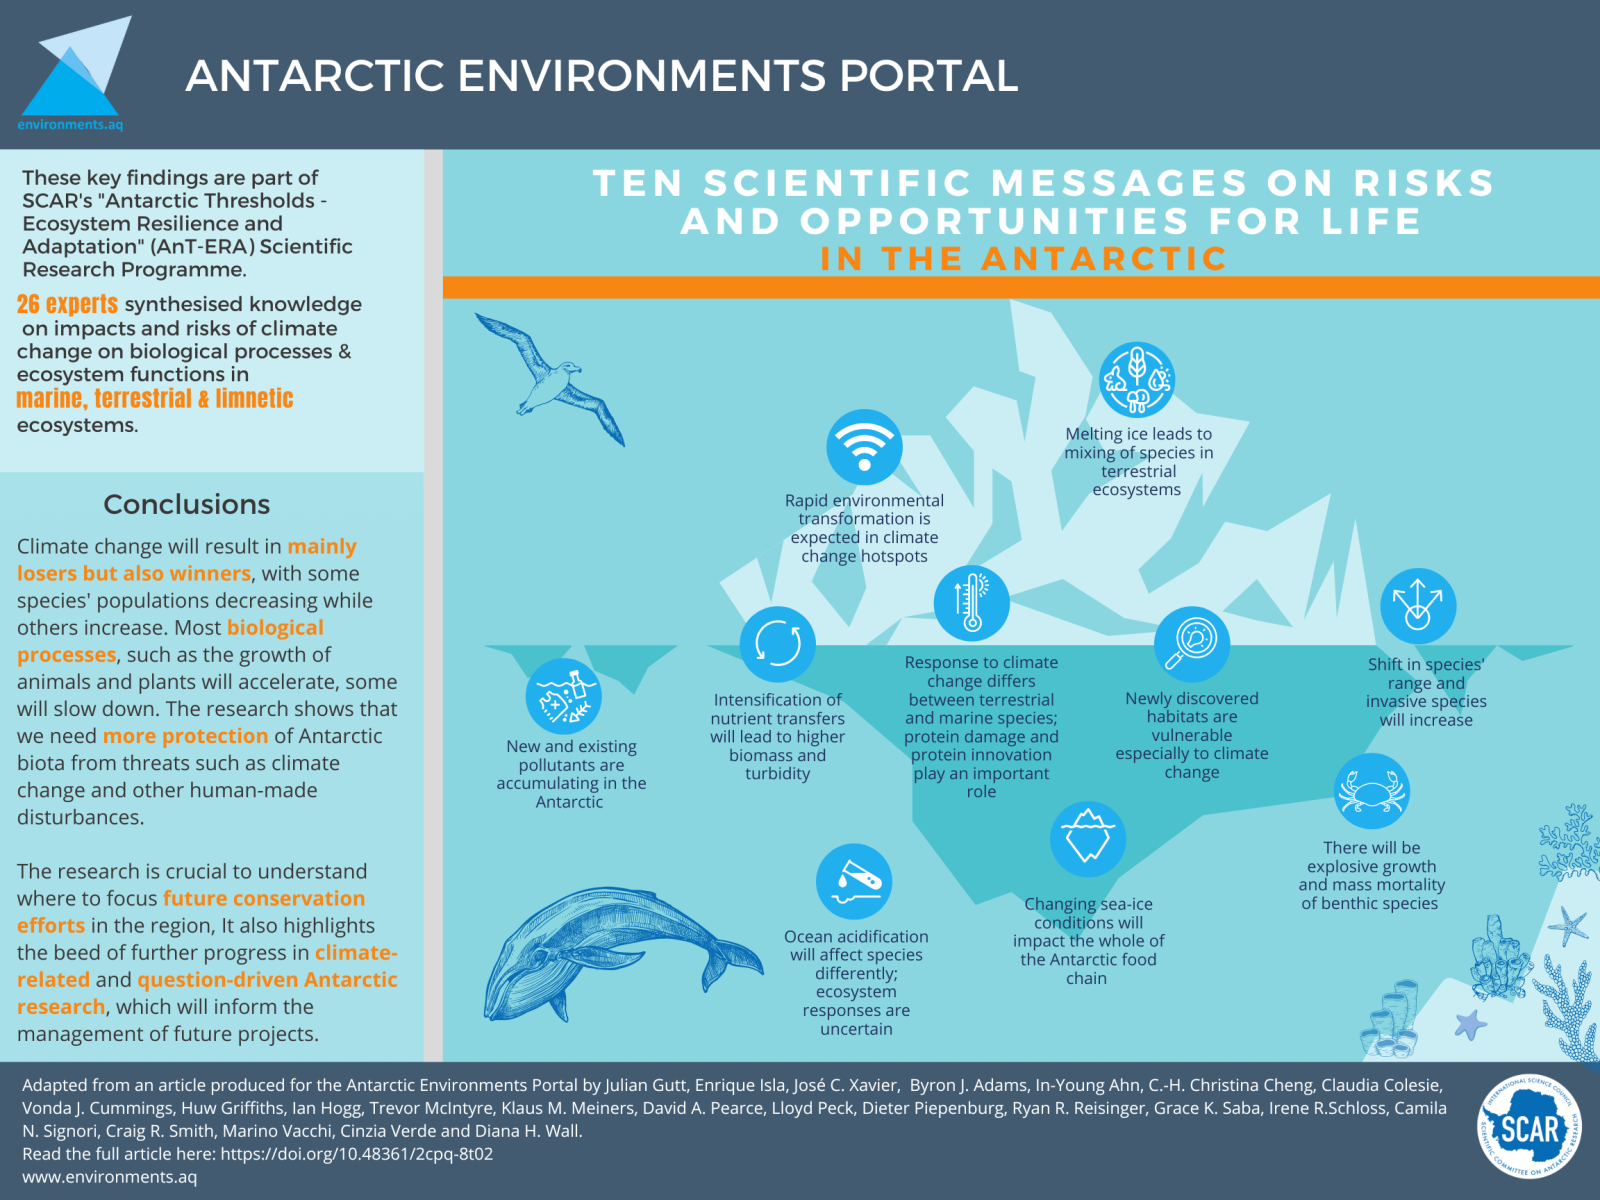 Ten-Scientific-messages-on-risks-and-opportunities-for-life-in-the-Antarctic